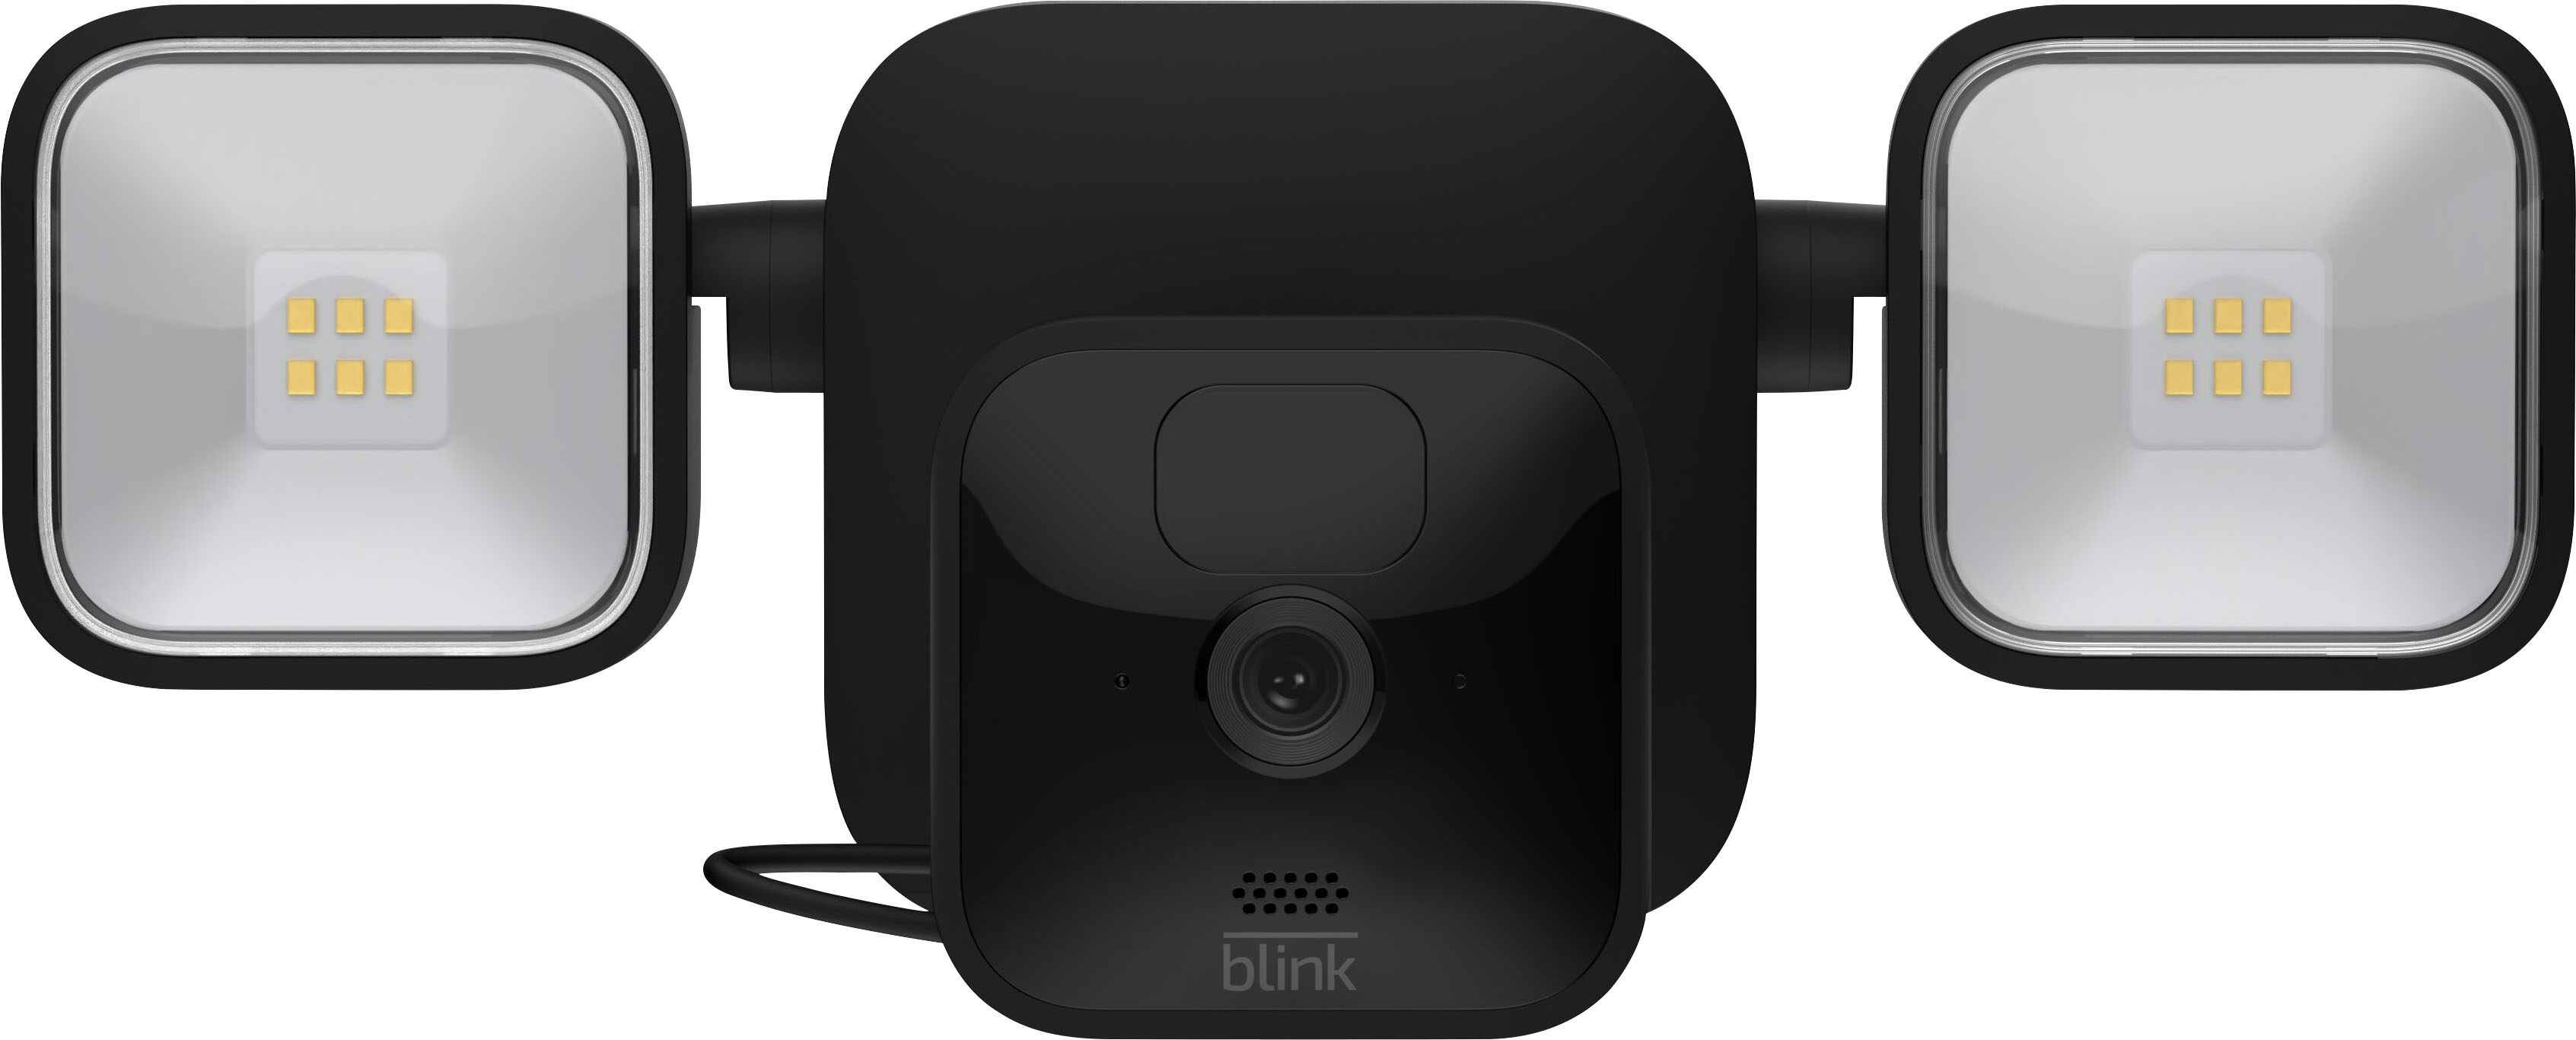 Blink Outdoor camera review: Security that fits the bill for Alexa